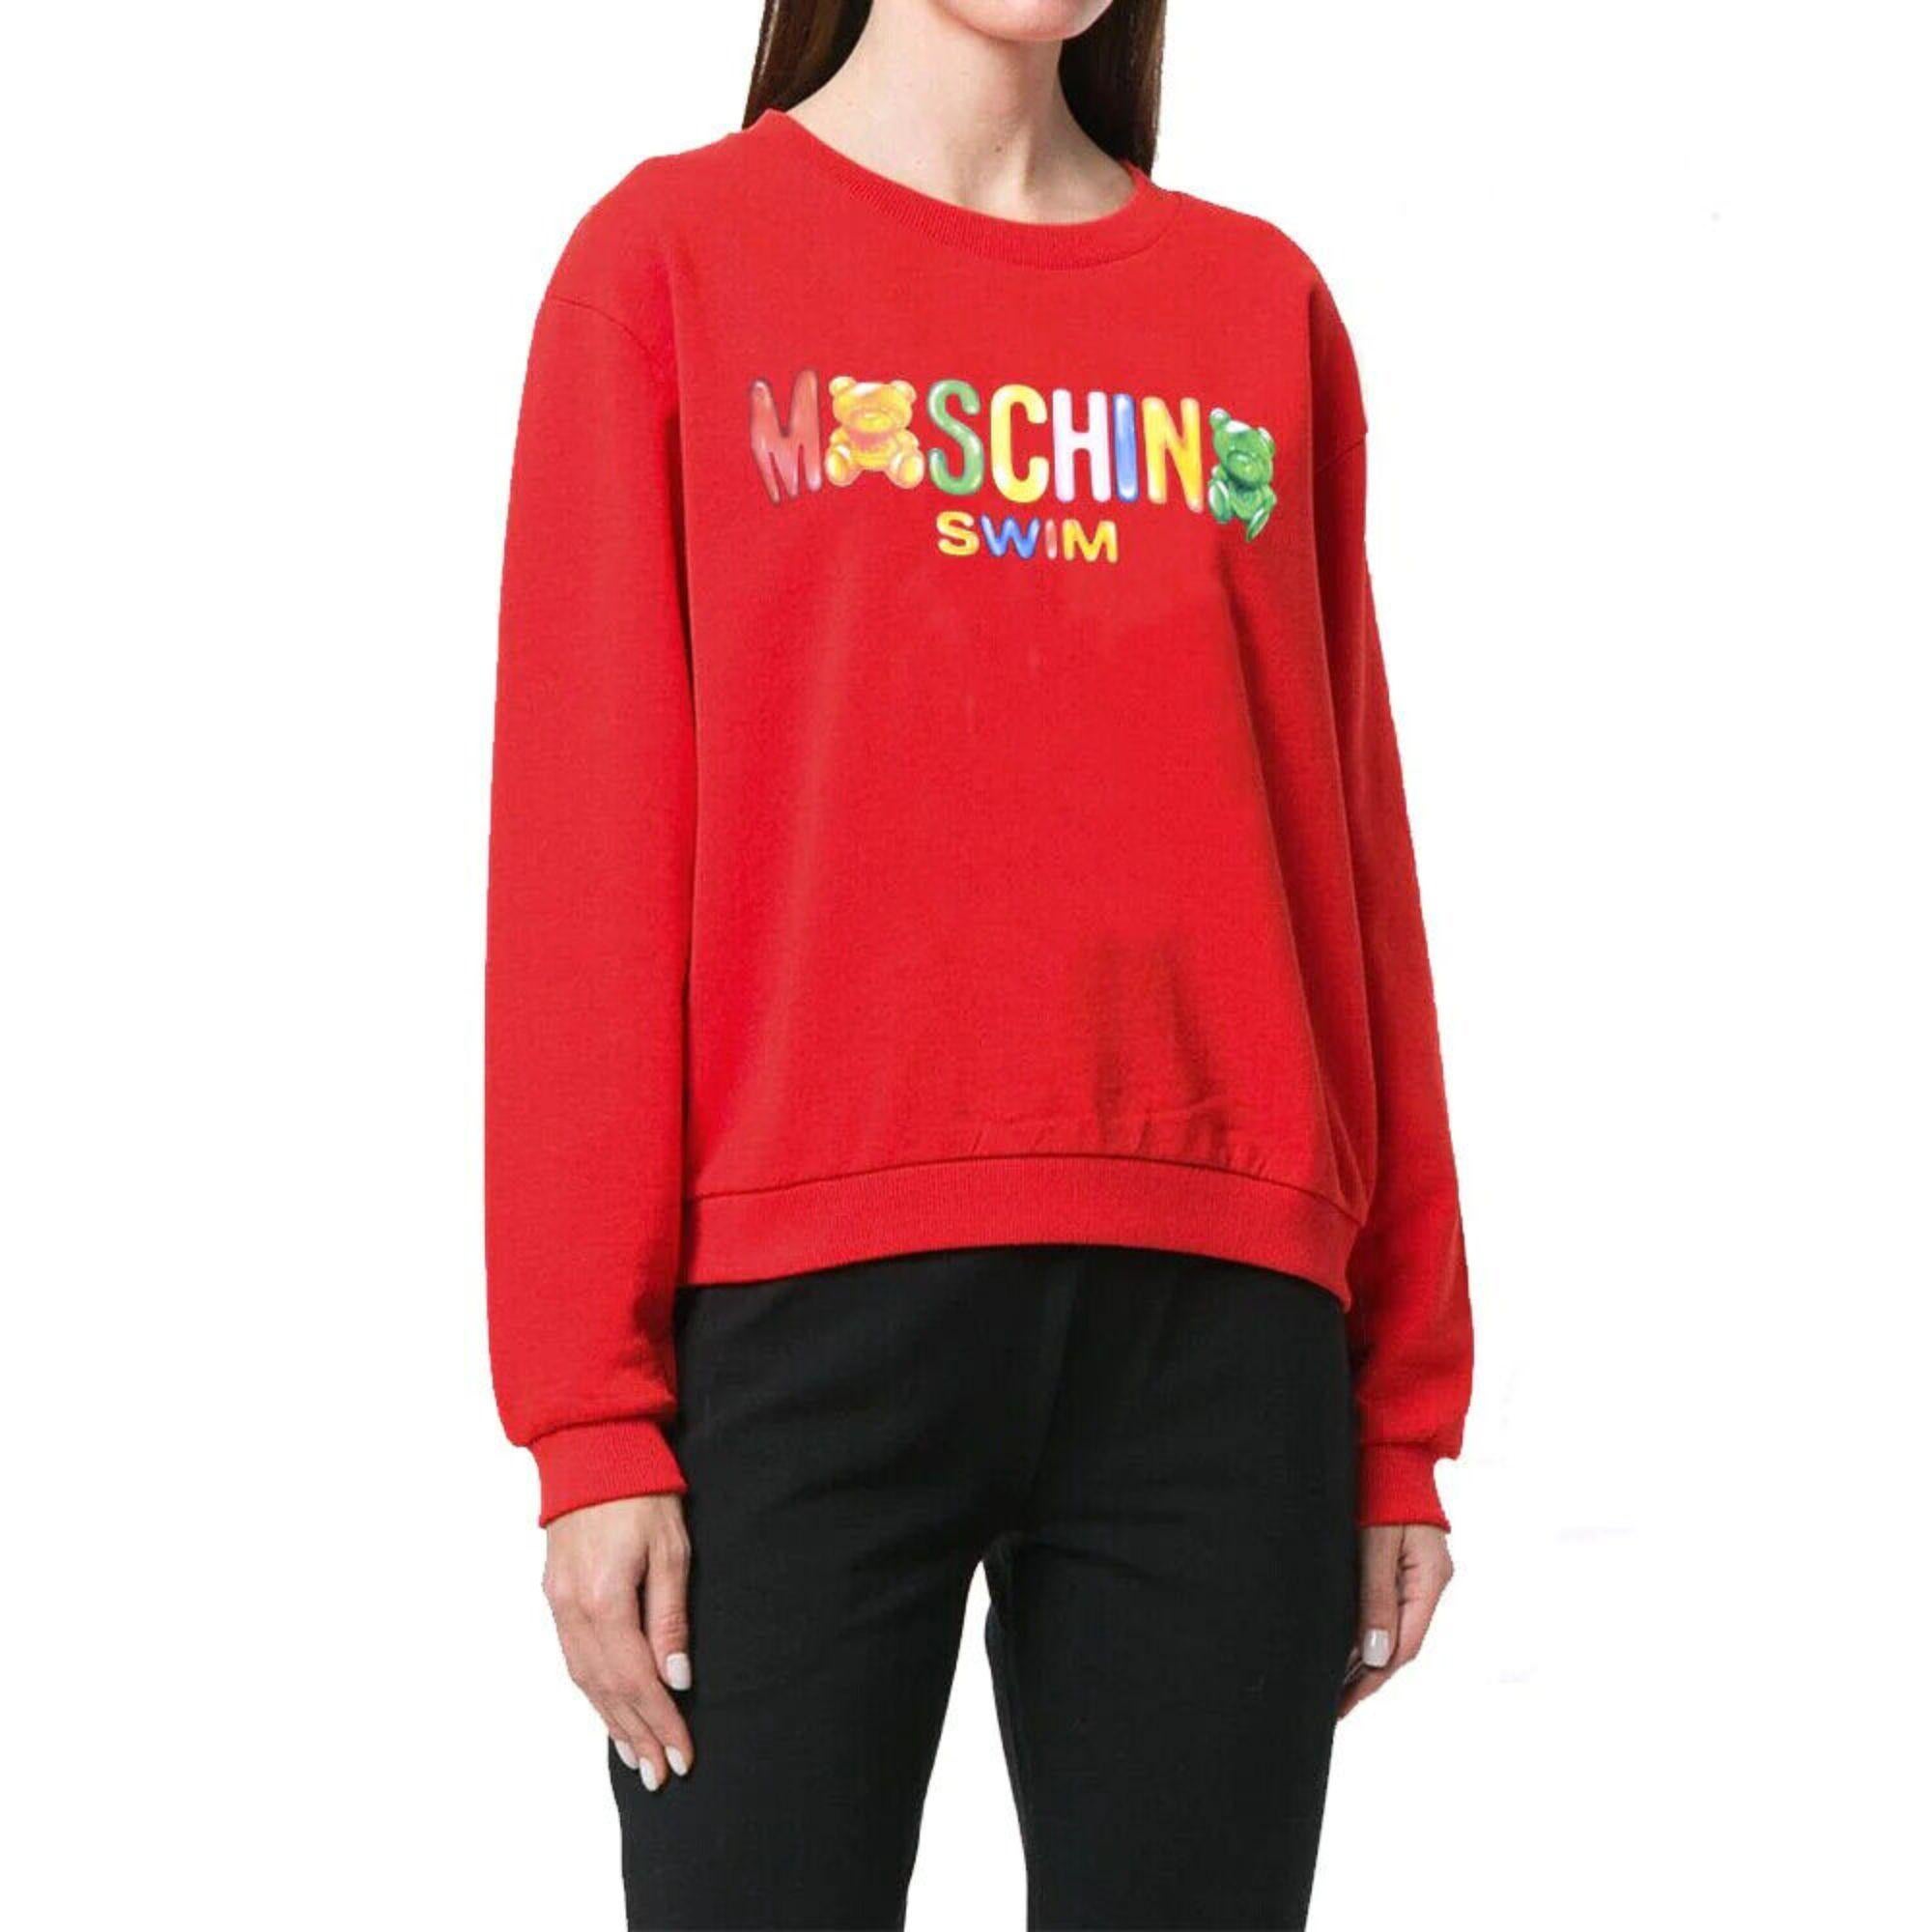 SS19 Moschino Swim Jeremy Scott Swim Jelly Gummy Teddy Bear Red Sweatshirt Candy

Additional Information:
Material: 100% Cotton
Color: Red
Size: XS / US XXS
Style: Pullover
Pattern: Logo, Gummy Bear
Dimensions: Shoulder to shoulder 18.5